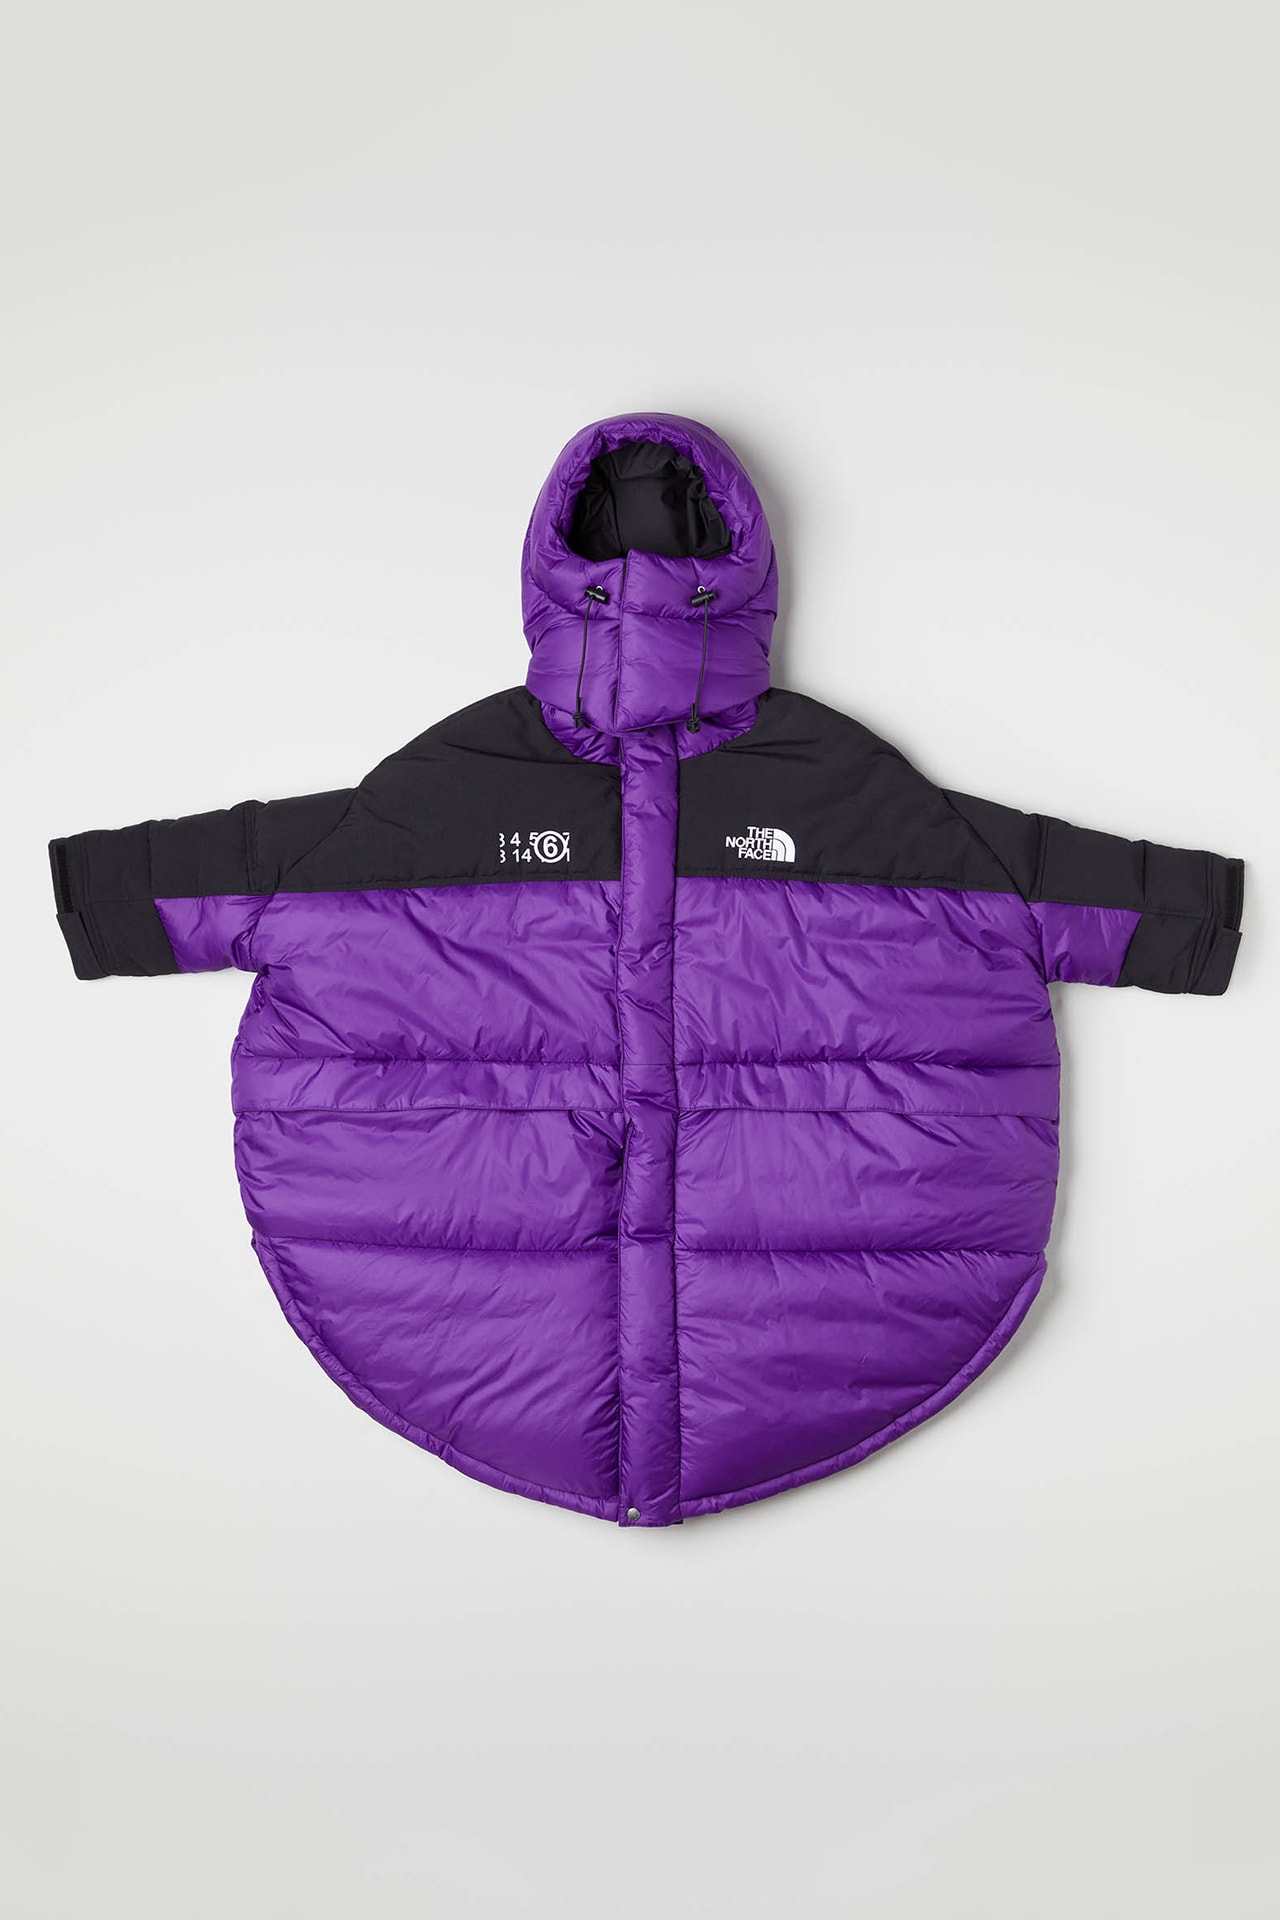 MM6 Maison Margiela The North Face Collaboration Fall Winter 2020 Circle Himalayan Parker Puffer Jacket Purple